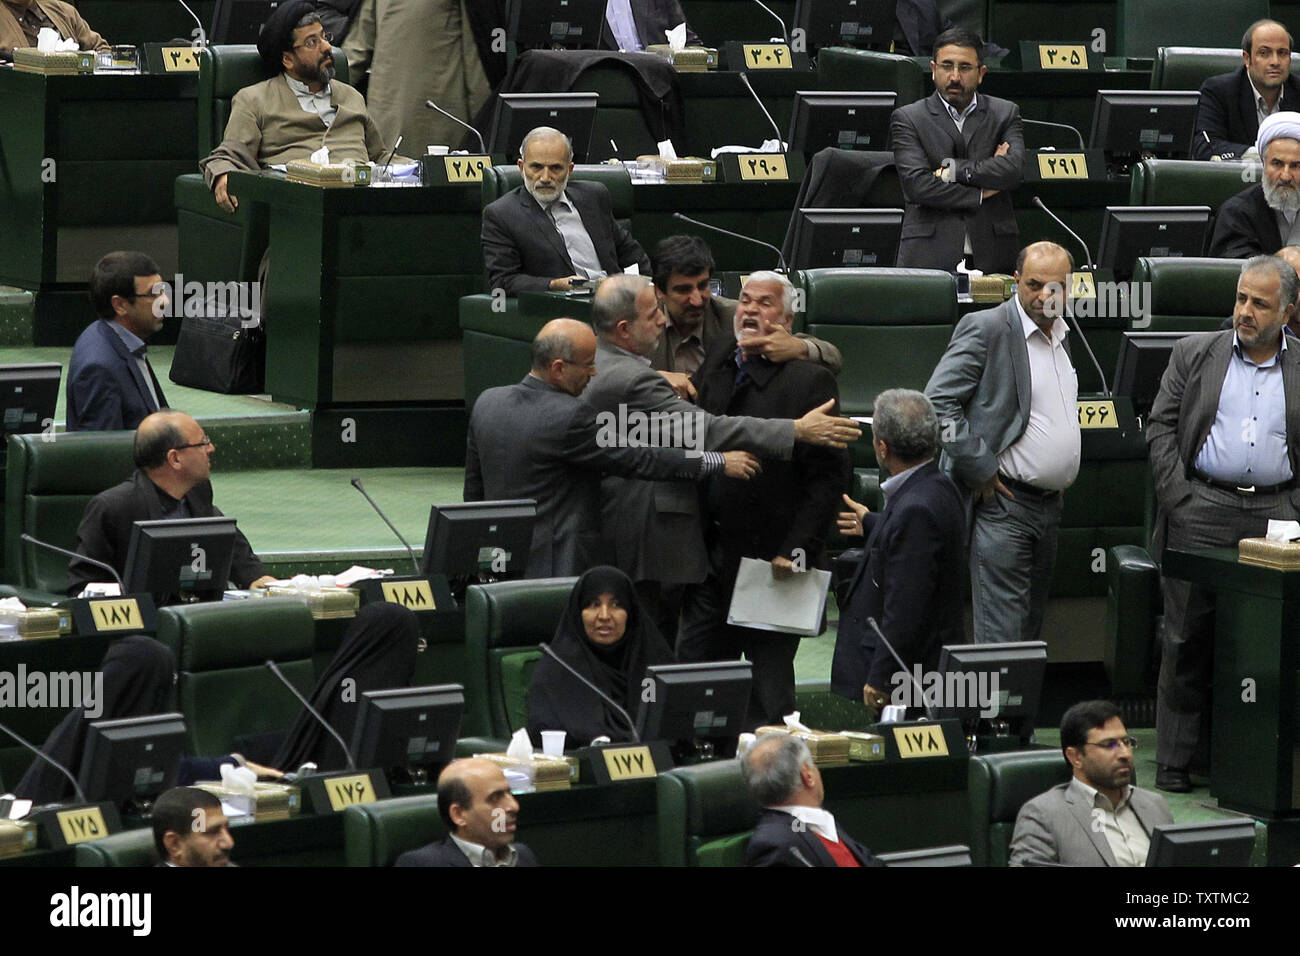 A member of the Iranian parliament protests while Iranian President Mahmoud Ahmadinejad (unseen) speaks during the impeachment of the labor minister Abdolreza Sheikholeslami, unseen, at the parliament in Tehran, Iran on February 3, 2013. Out of 272 lawmakers in the parliament on Sunday, 192 voted against the labor minister. The main reason behind the MP's decision to dismiss the minister was Sheikholeslami's refusal  to remove former Tehran prosecutor general Saeed Mortazavi from his post as the director of the Social Security Organization.     UPI/Maryam Rahmanian Stock Photo